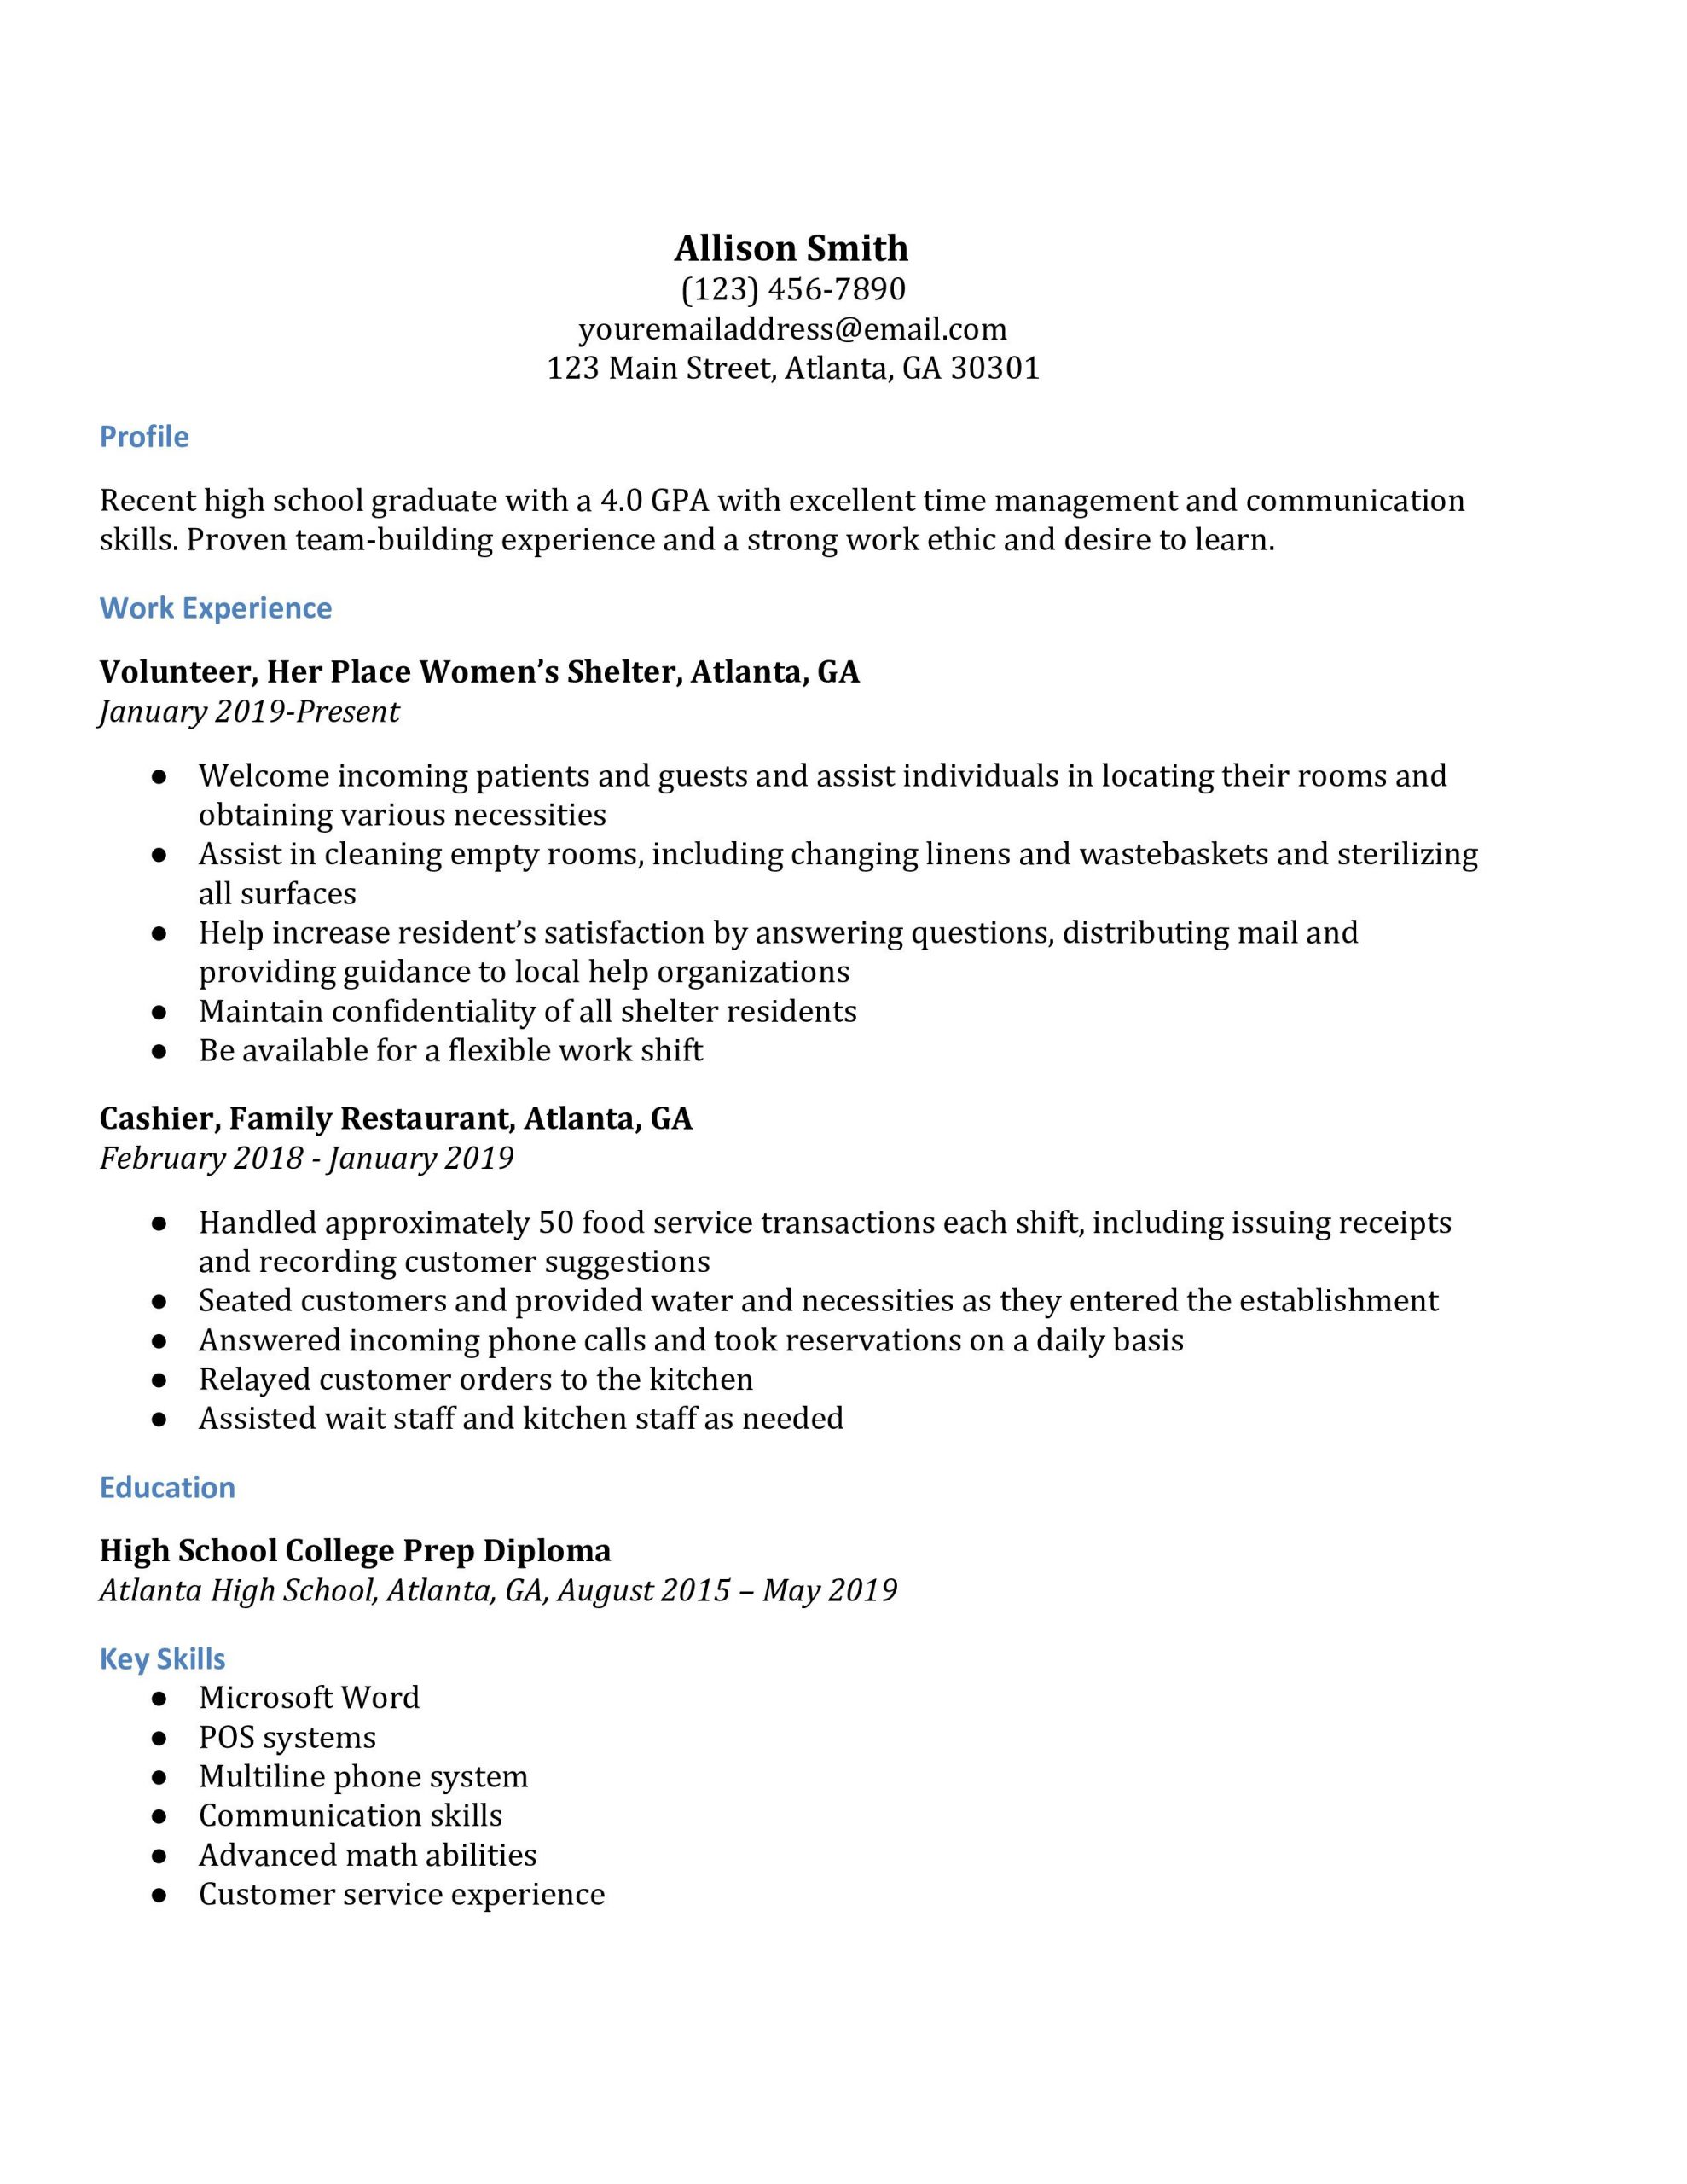 Resume Samples for A High School Student High School Resume Examples – Resumebuilder.com